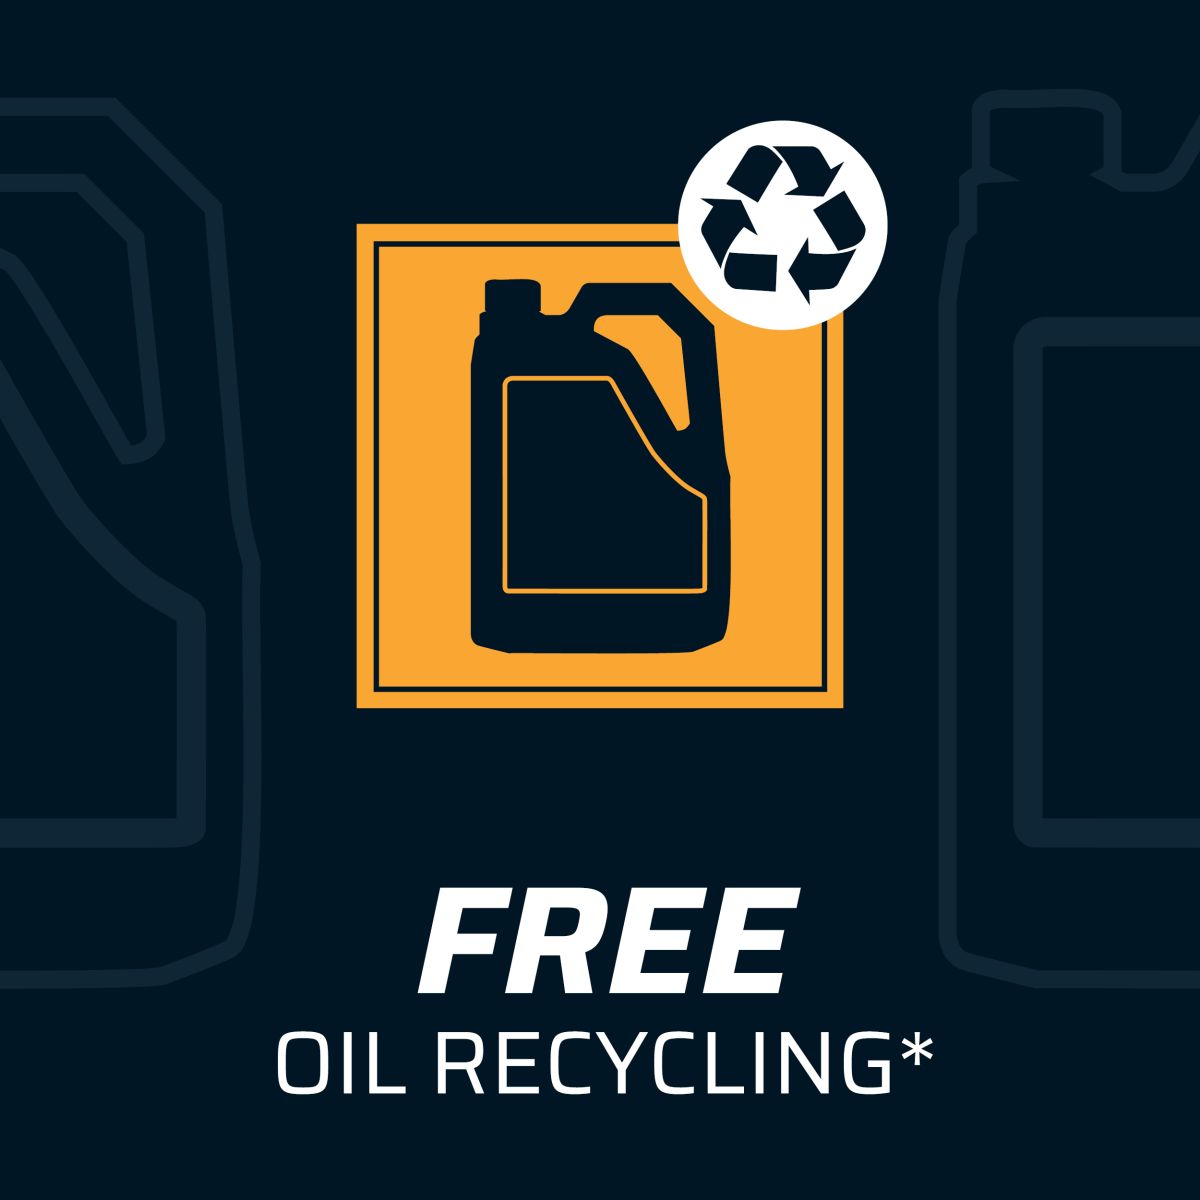 Free Oil Recycling*